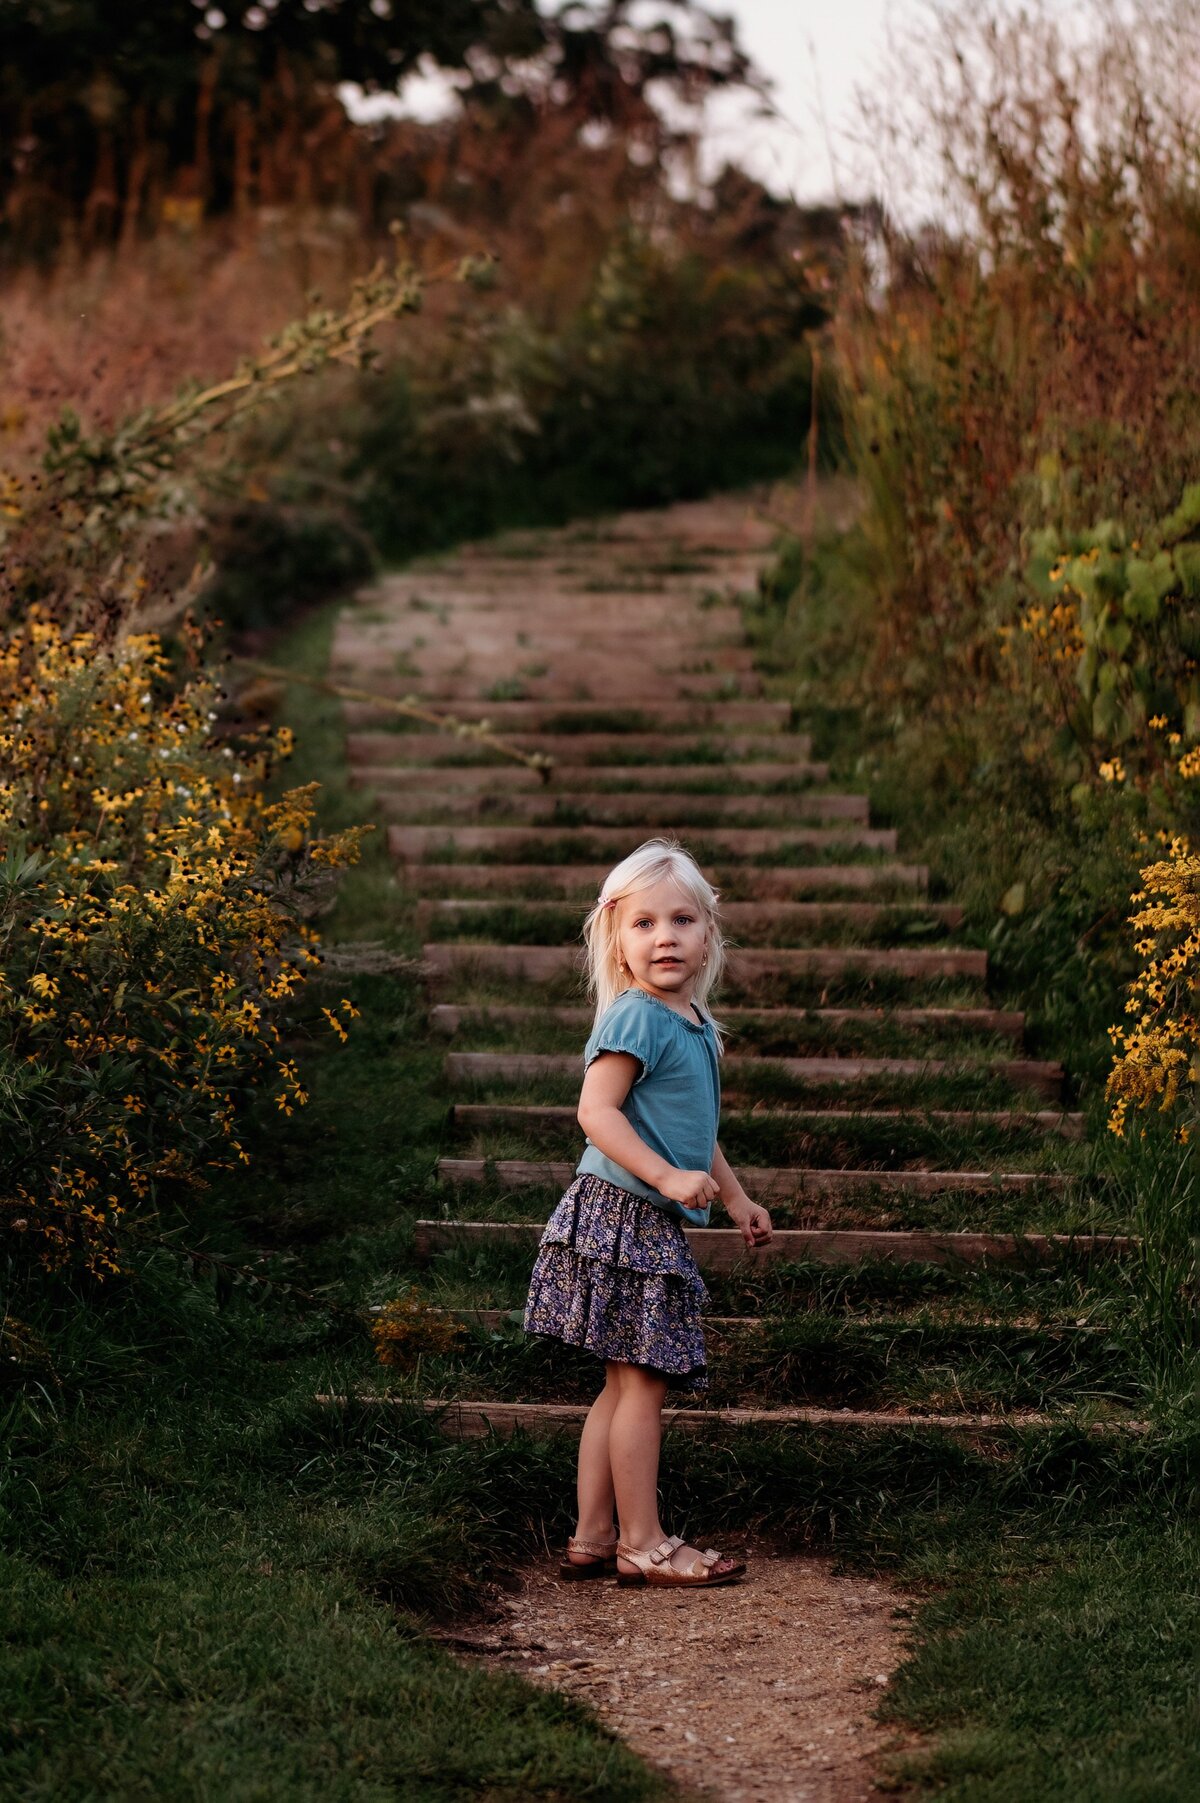 Child at staircase McKennaPattersonPhotography